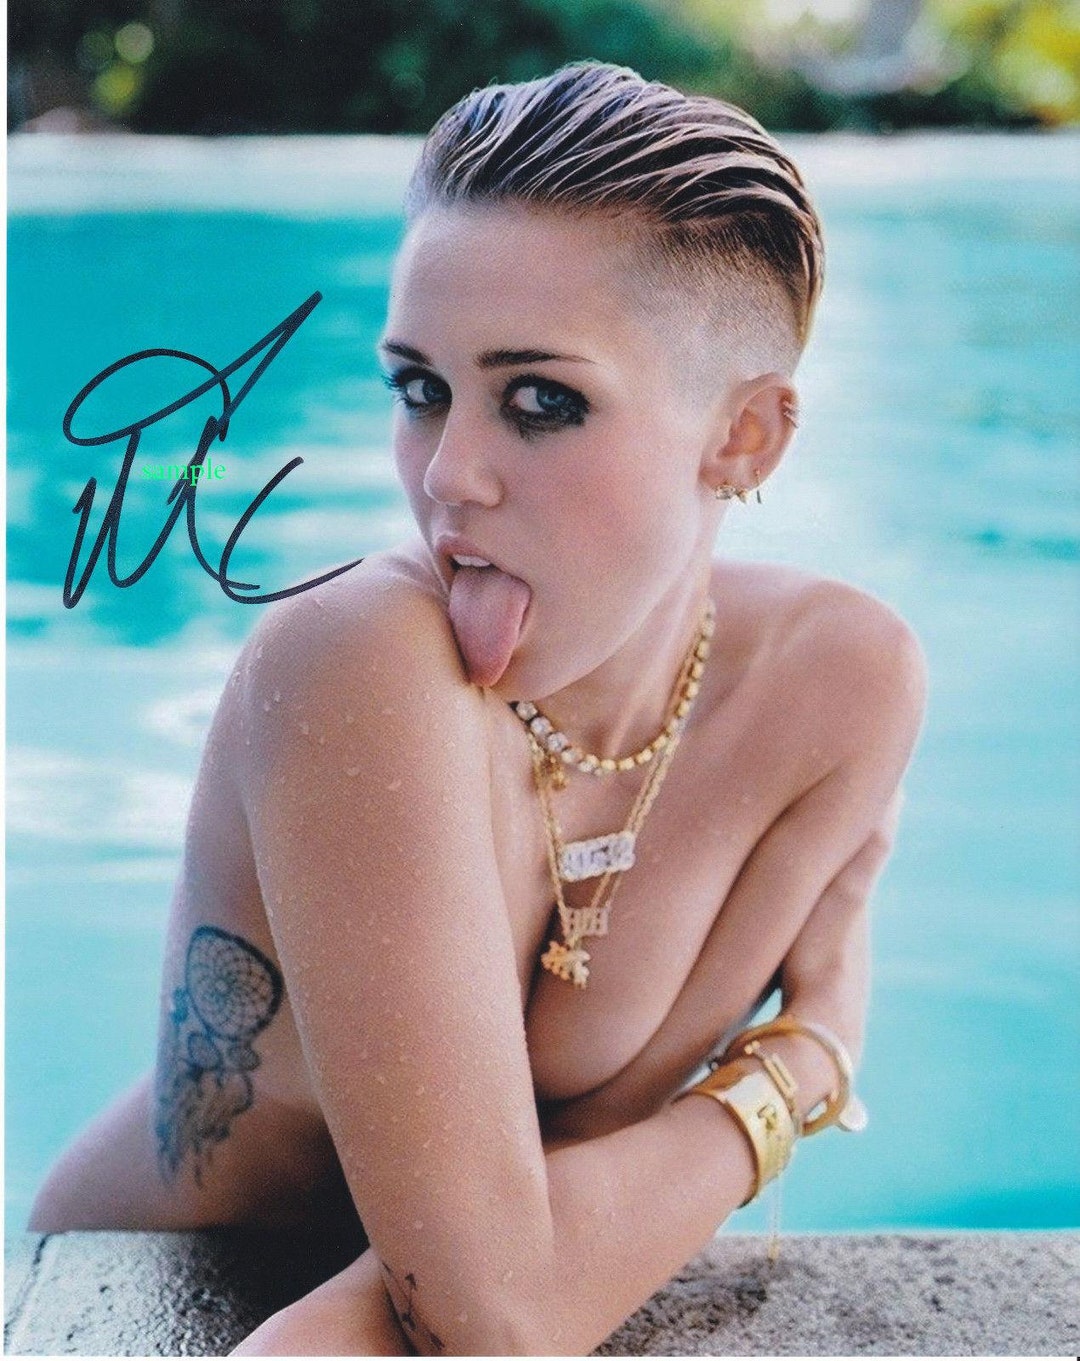 Mature Pussy Miley Cyrus - MILEY CYRUS 2 Reprint 8X10 Signed Autographed Photo Picture - Etsy